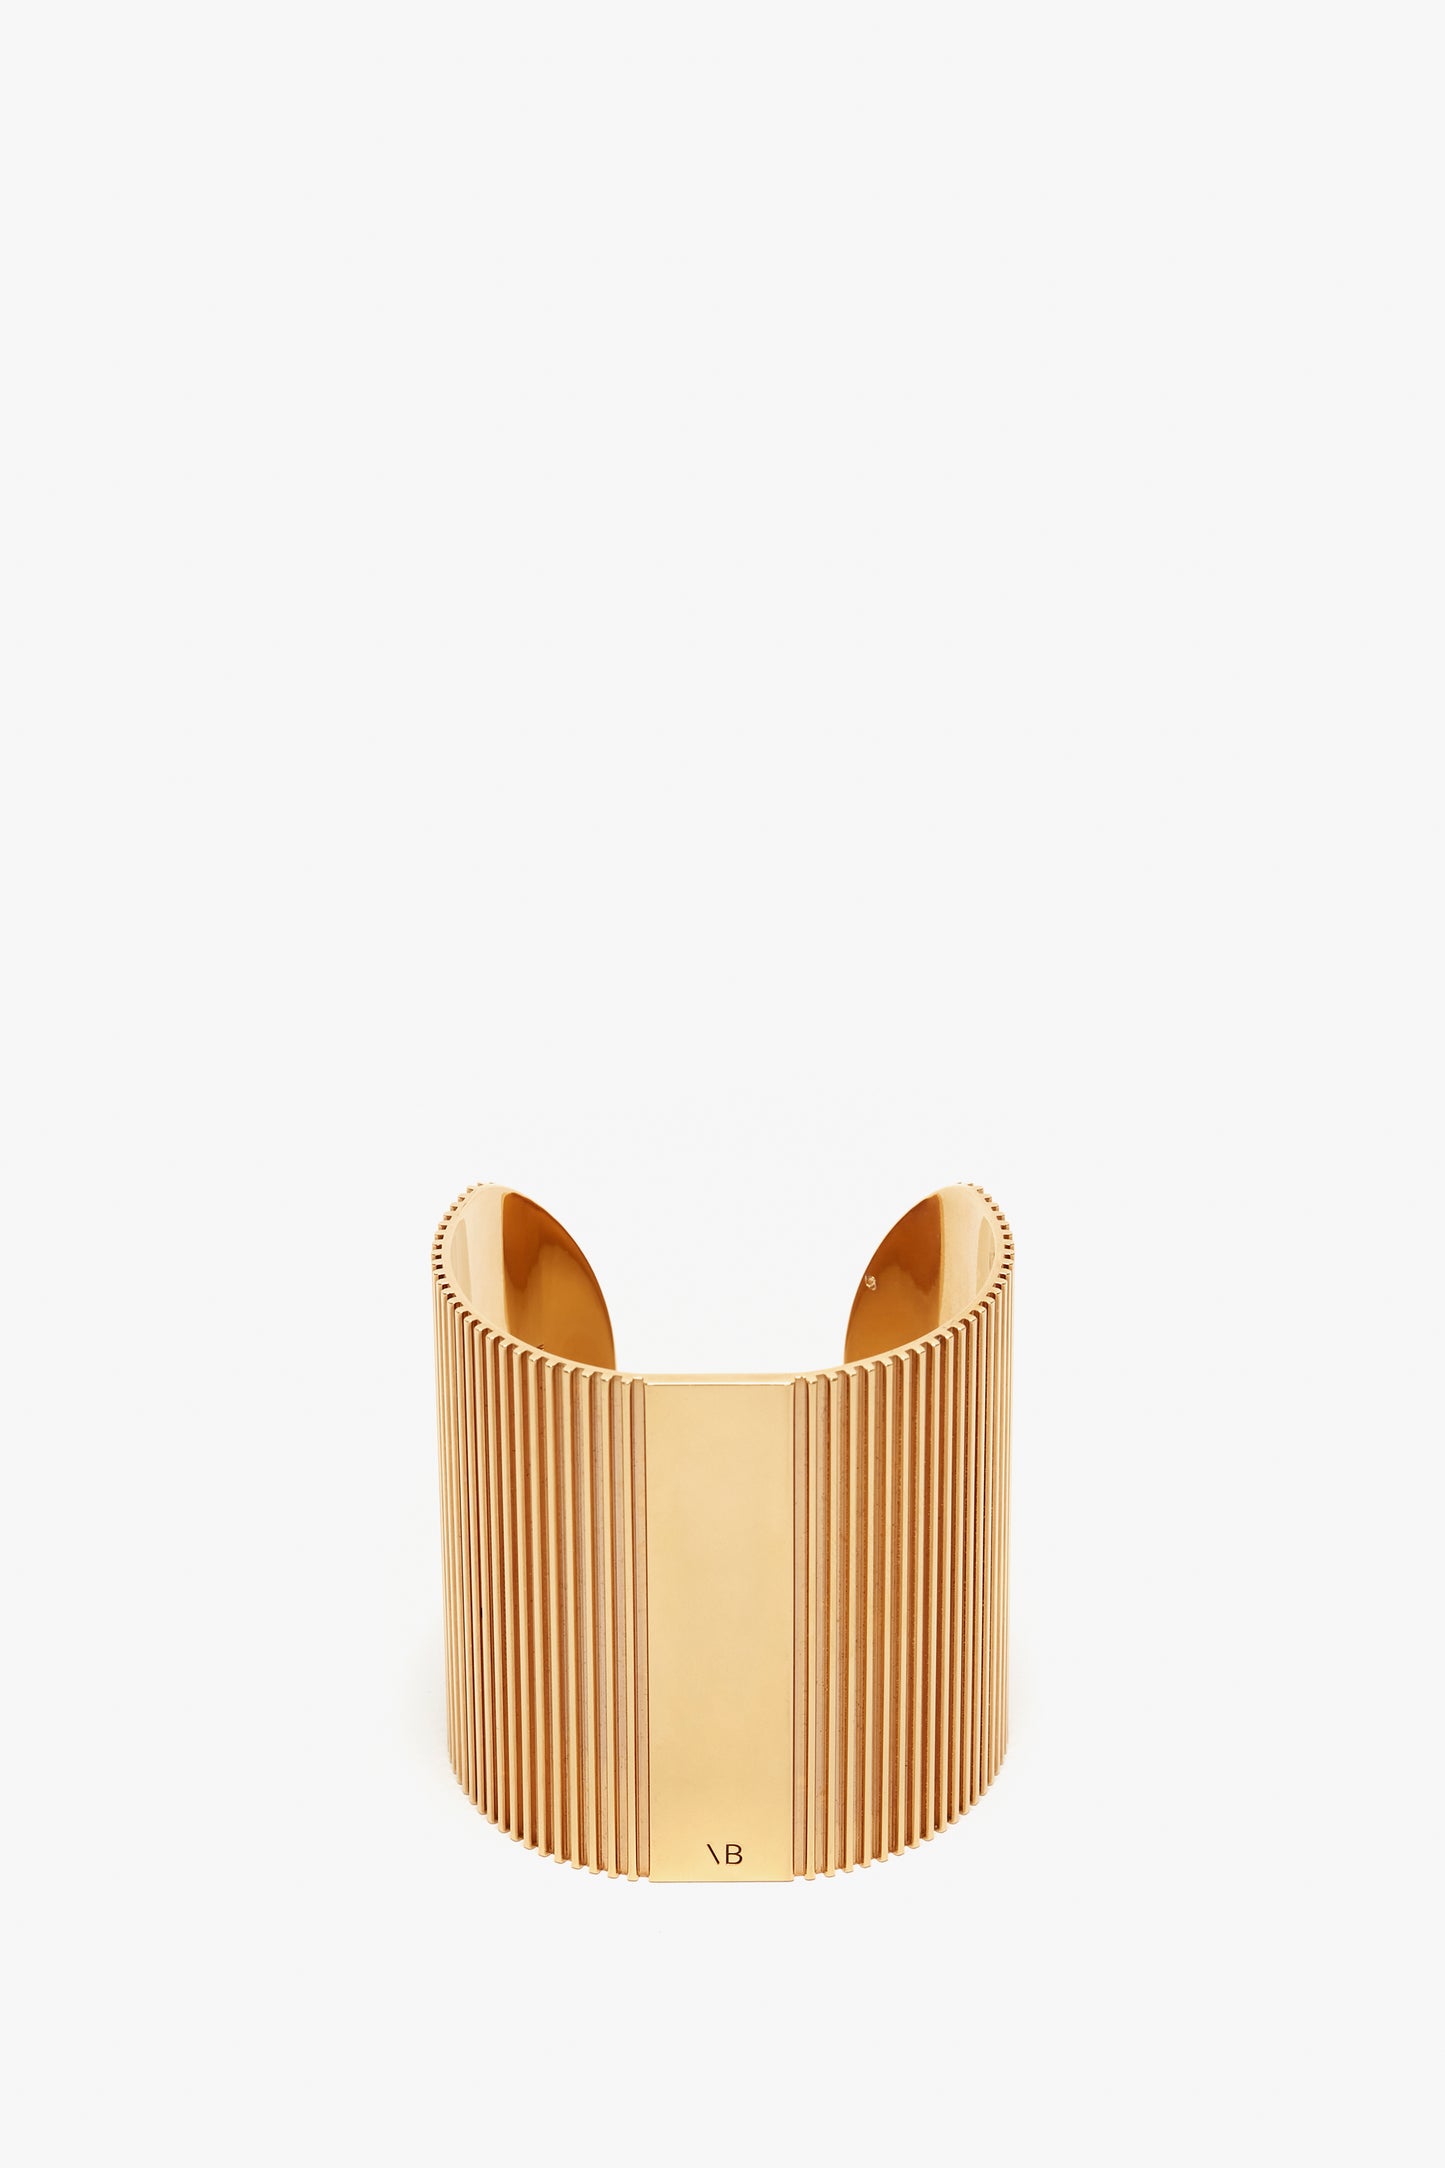 Victoria Beckham's Exclusive Perfume Cuff In Gold cuff bracelet with vertical ridges on a white background.